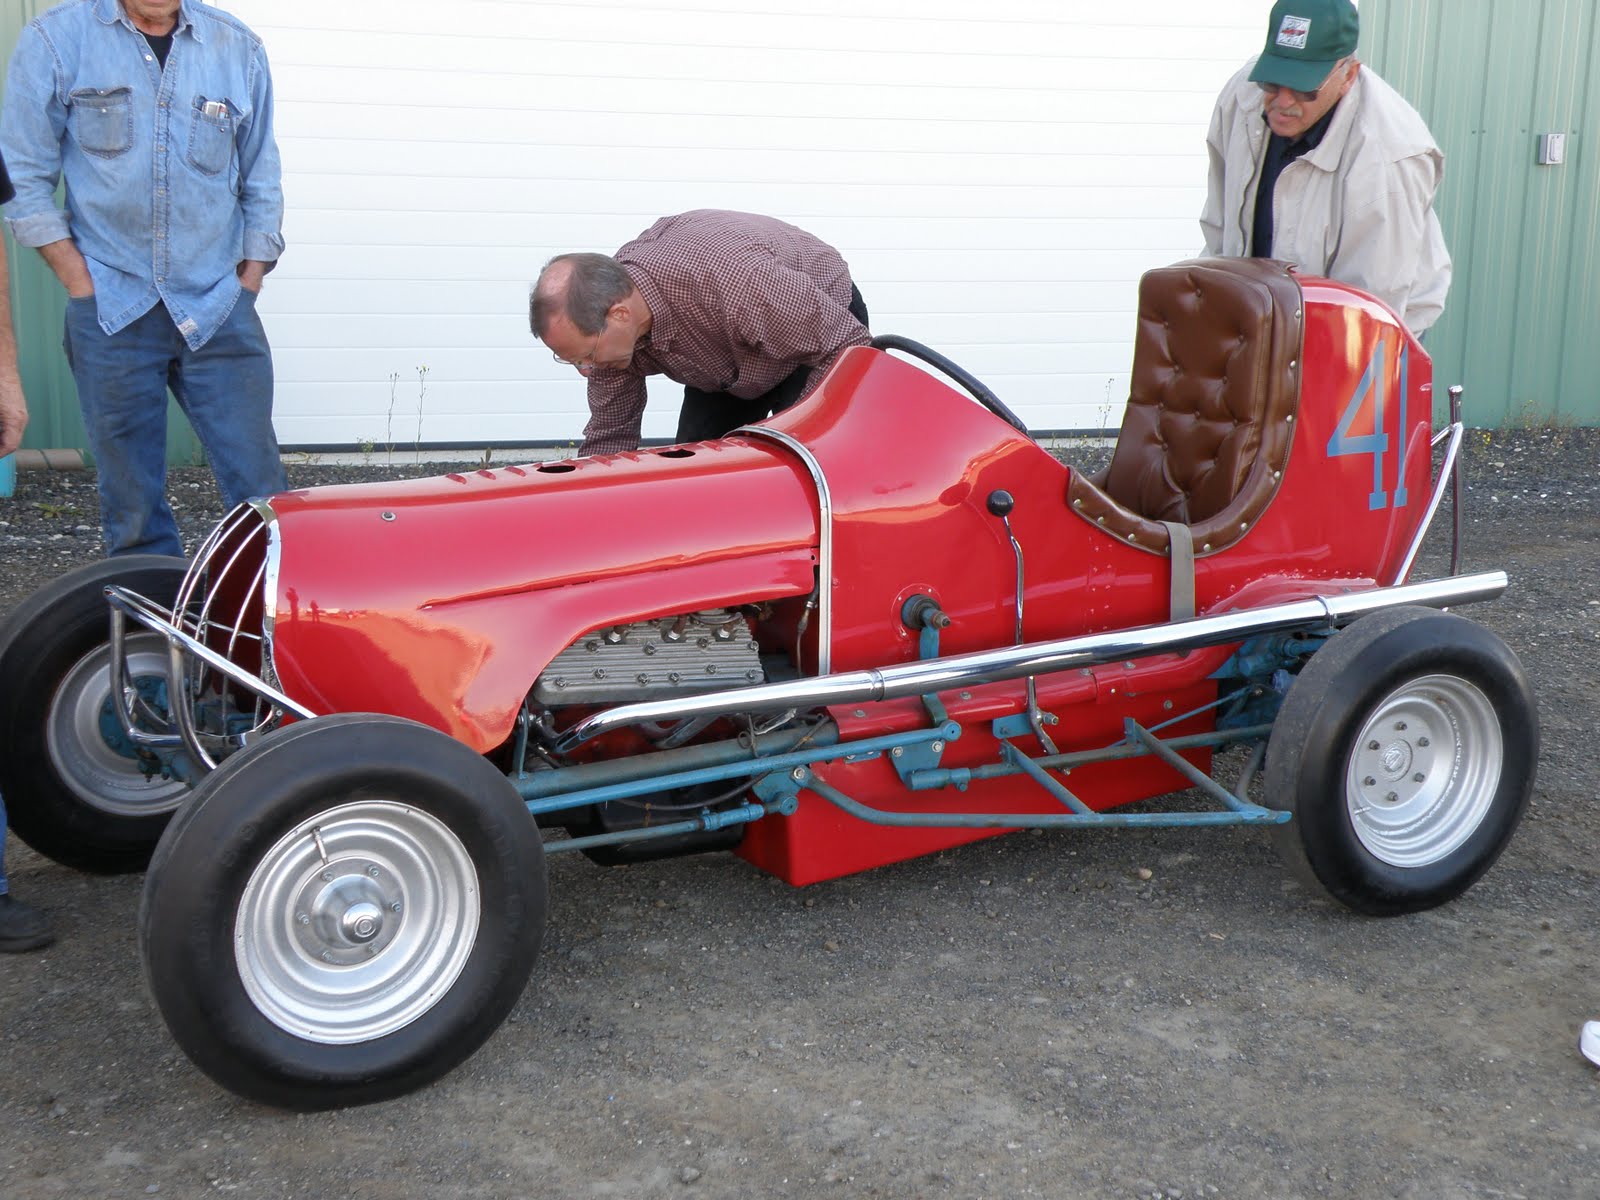 Fountainhead Antique Auto Museum: In the Shop: Winters-Ford V8-60 Midget Racer1600 x 1200